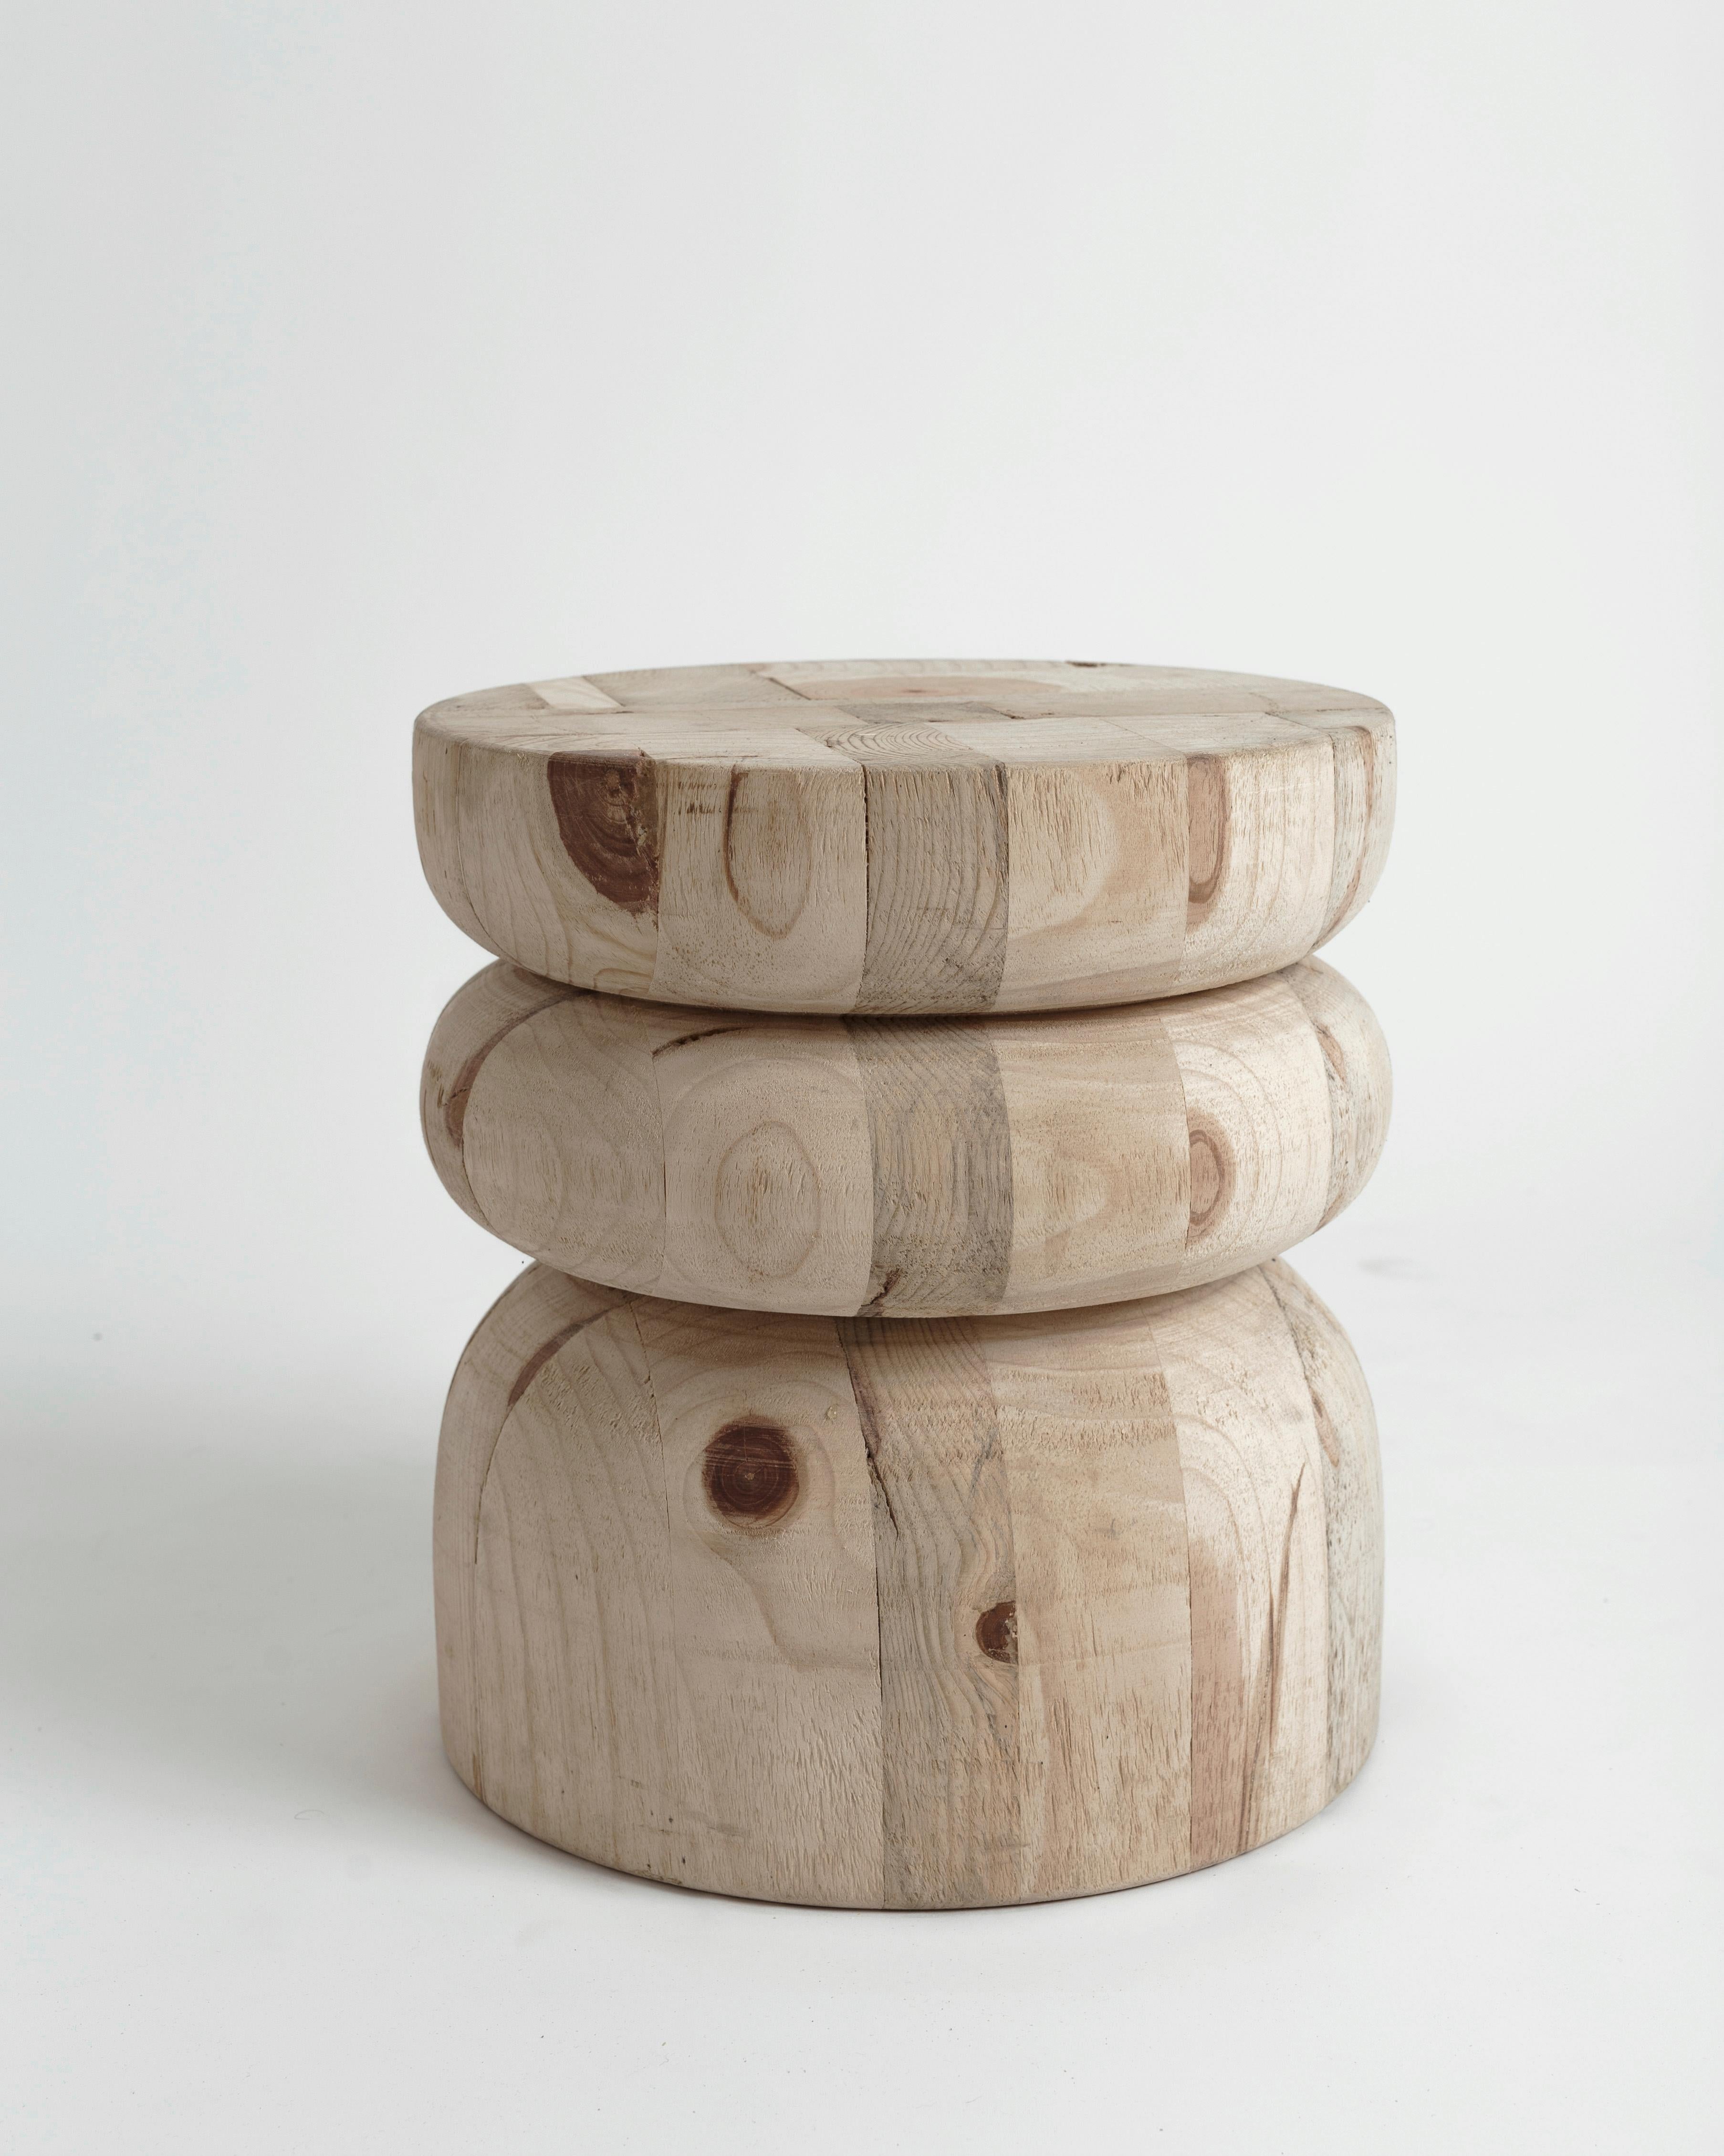 Utility sculpture:
1 Neru, functions as a stool/table 
Create your own TOTEM by stacking 3 or 4 Nerus!
Material: Radiata Wood (Indoors)

Rebeca Cors (México, 1988) works as an independent artist under the name CORS by Rebeca Cors, which she founded